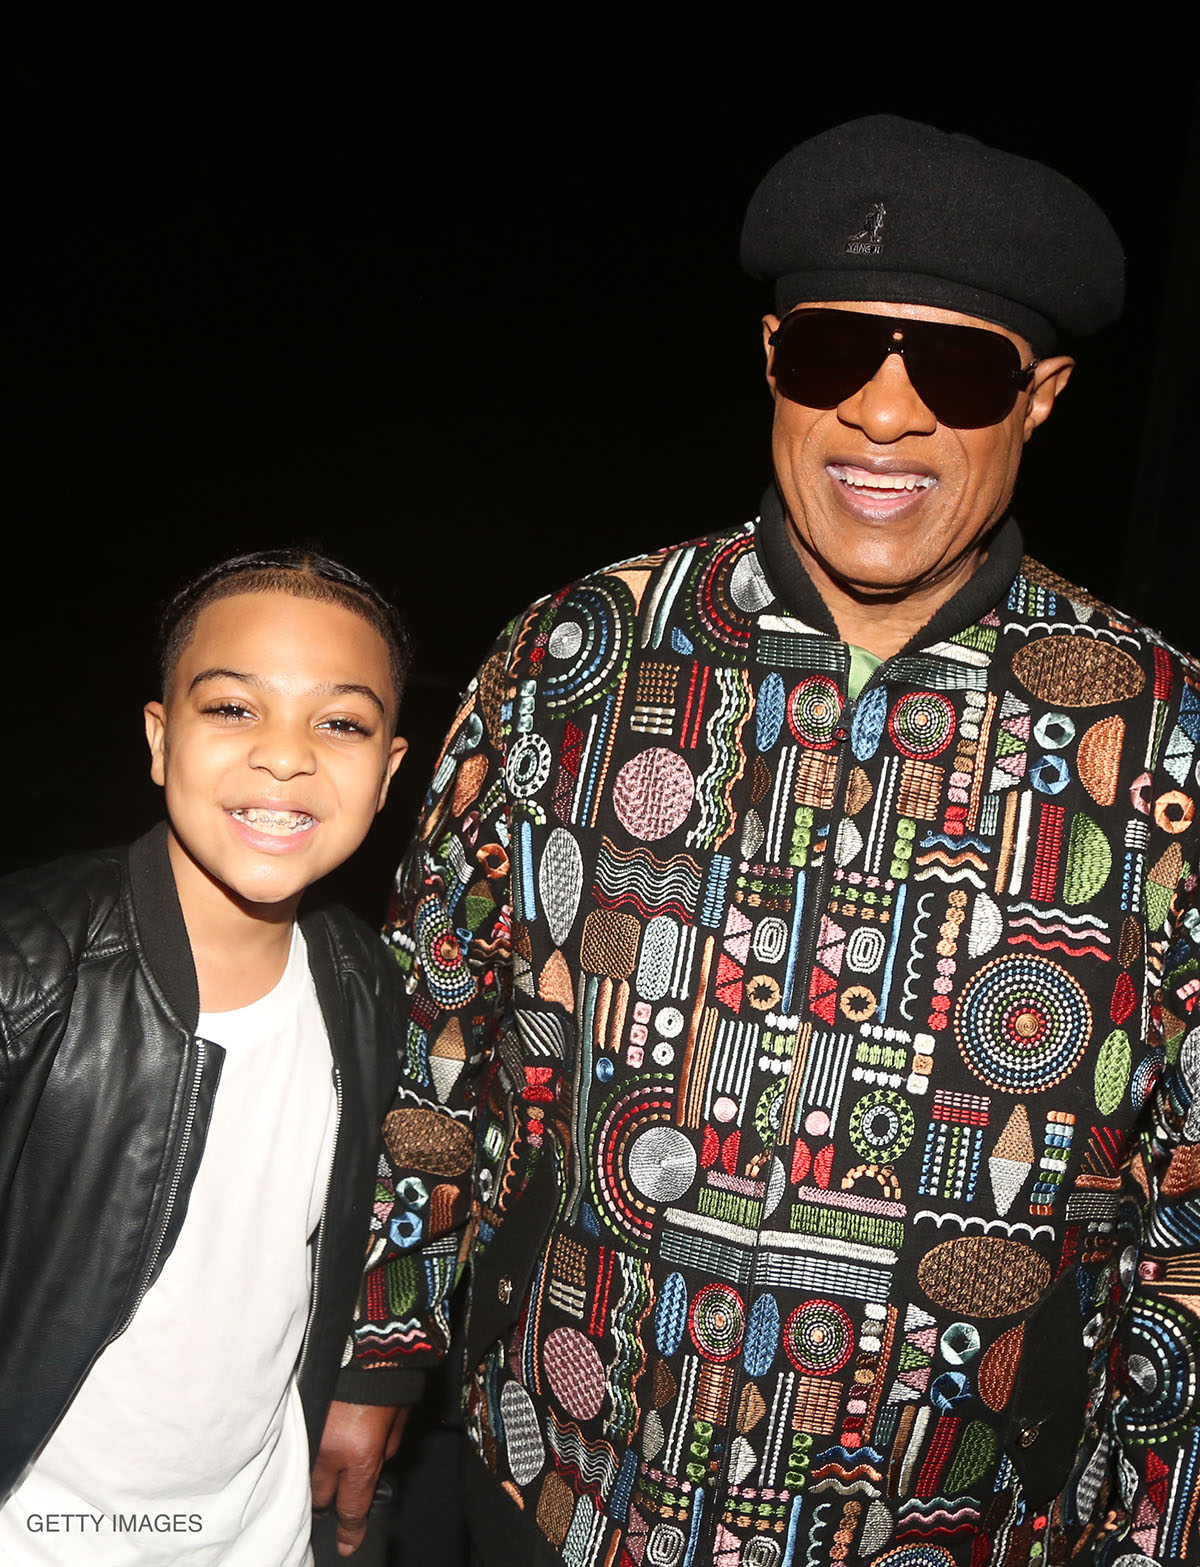 Christian Wilson, one of the two young actors who play "Little Michael" in MJ the Musical, and Stevie Wonder pose backstage at the Neil Simon Theatre in New York, NY, in May 2022.